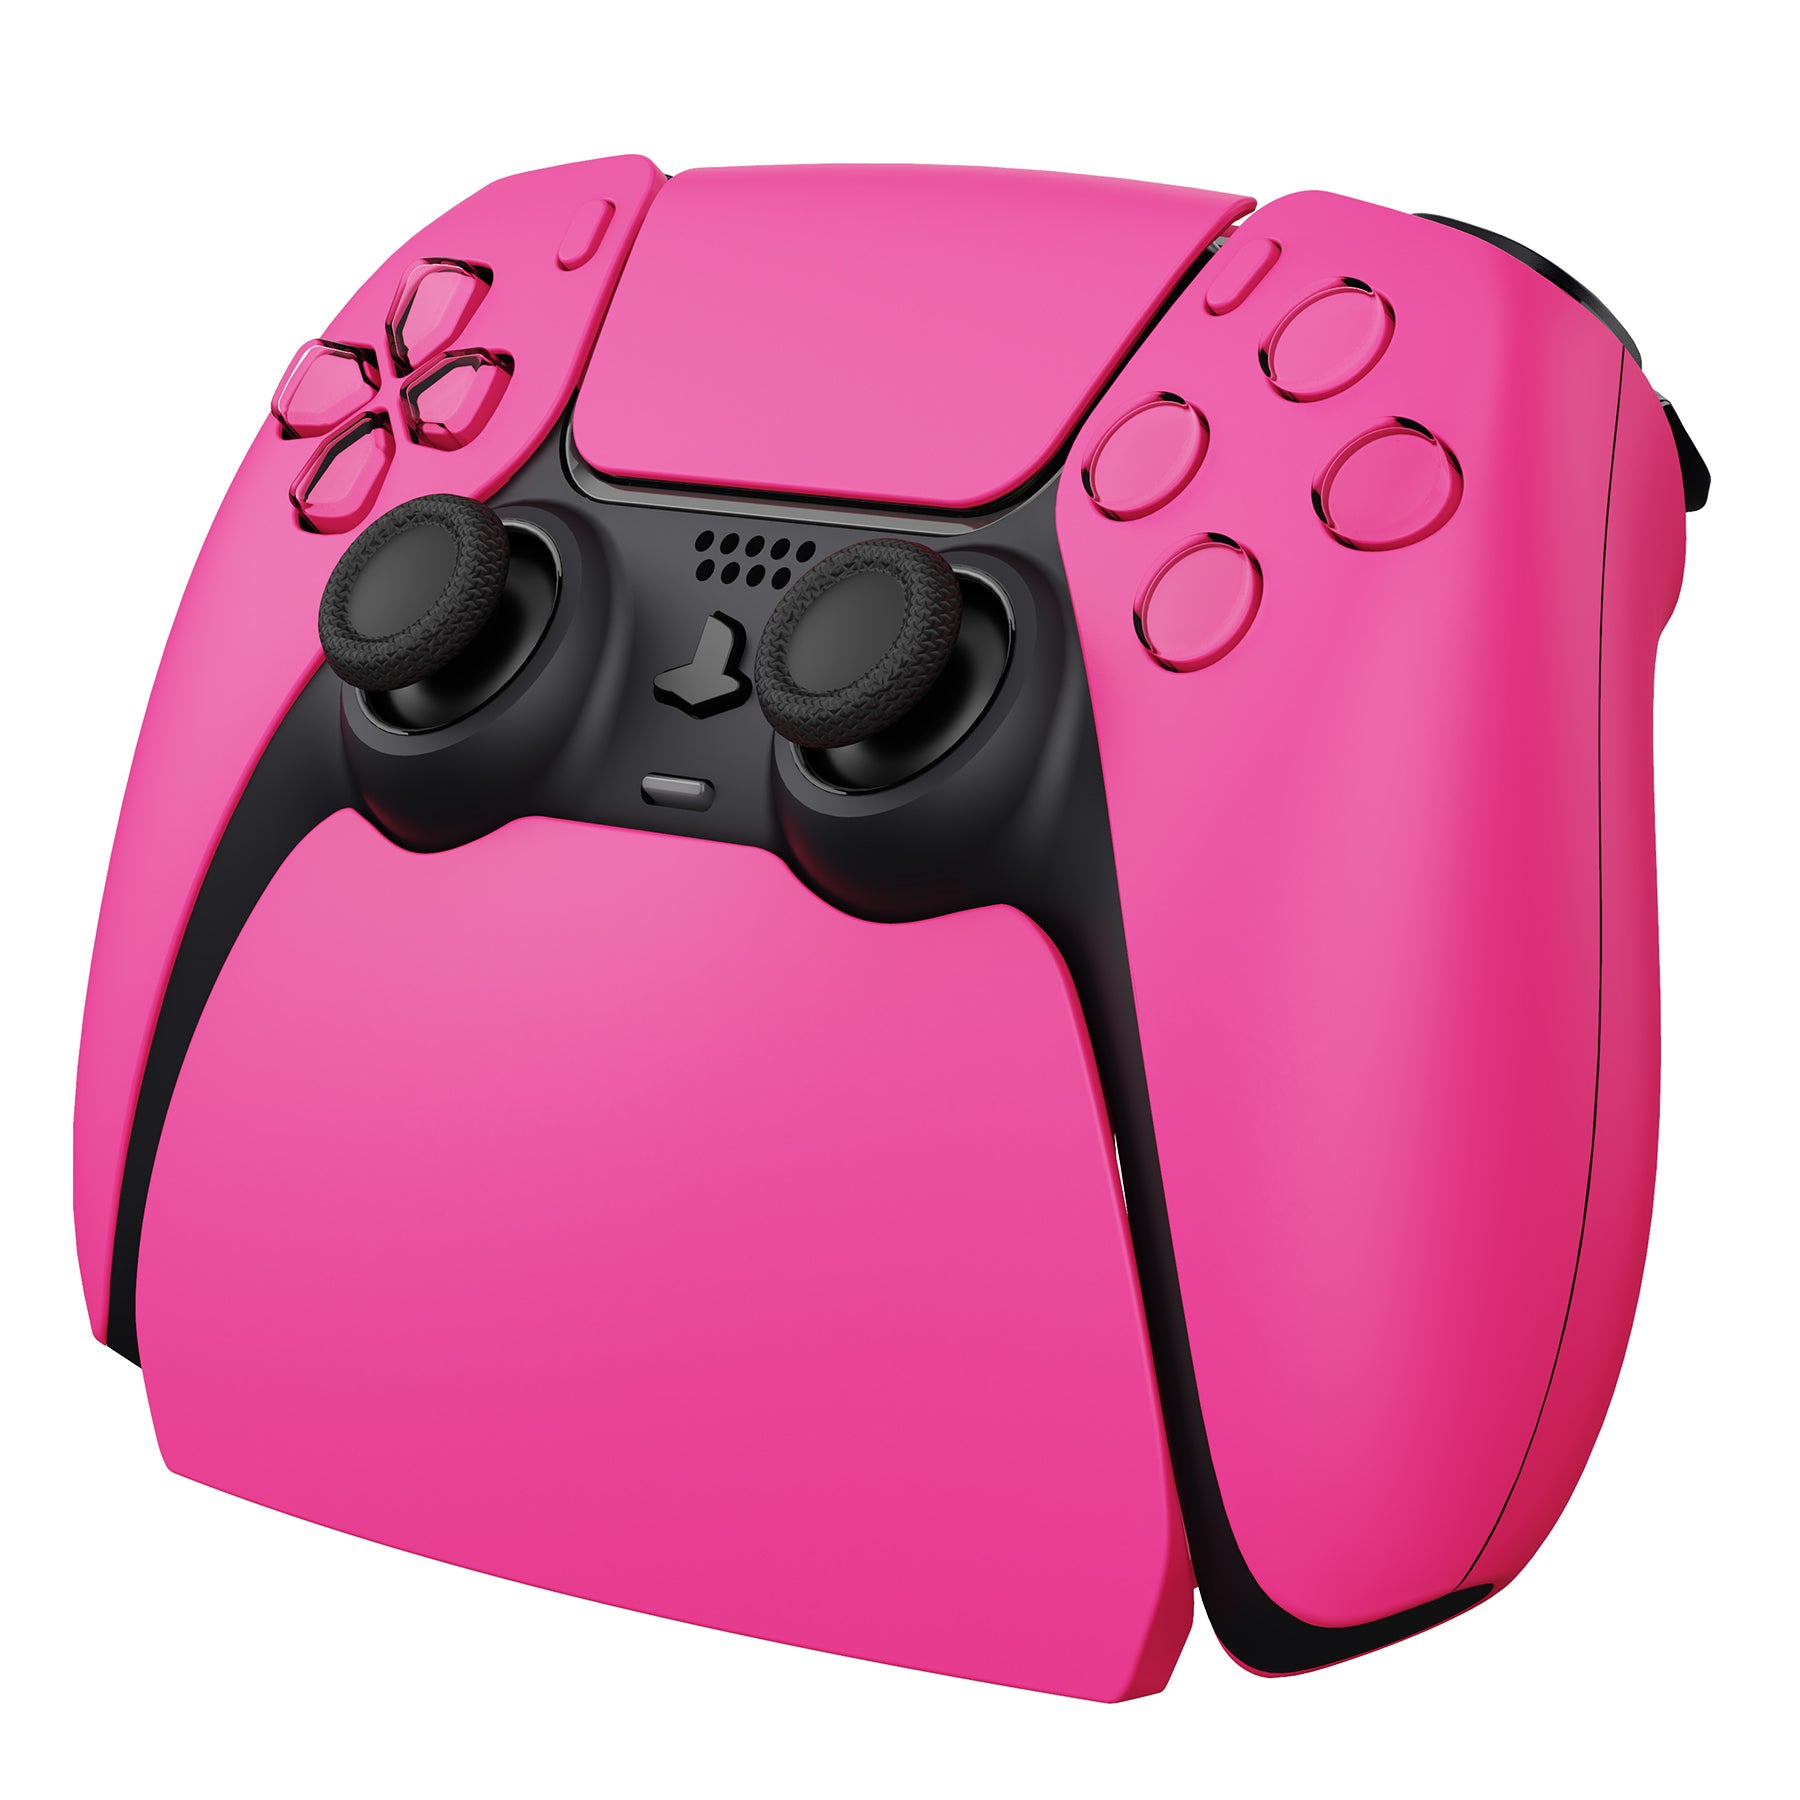 PlayVital Desk Holder Controller Display Stand with Rubber Pads for PS5  Controller - Nova Pink - PFPJ080